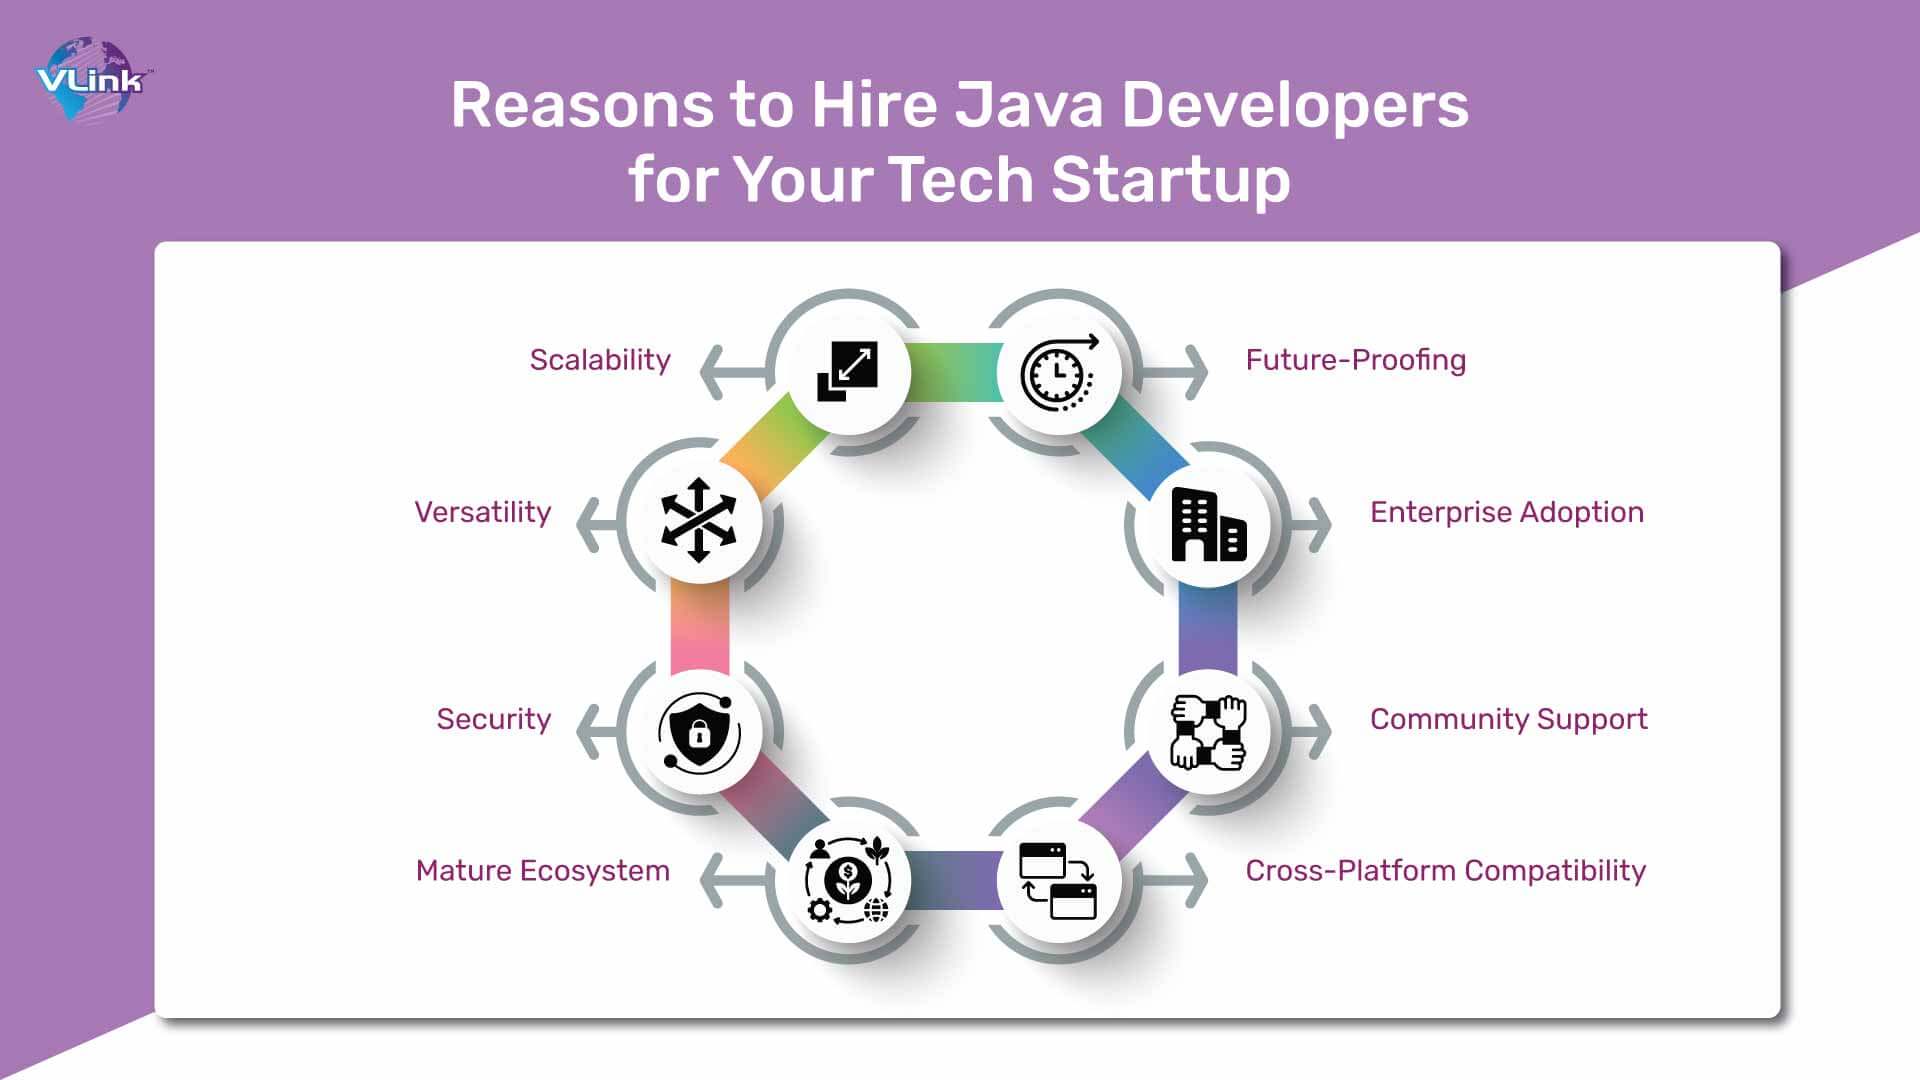 Reasons Why you Should Hire Java Developers for your Tech Startup